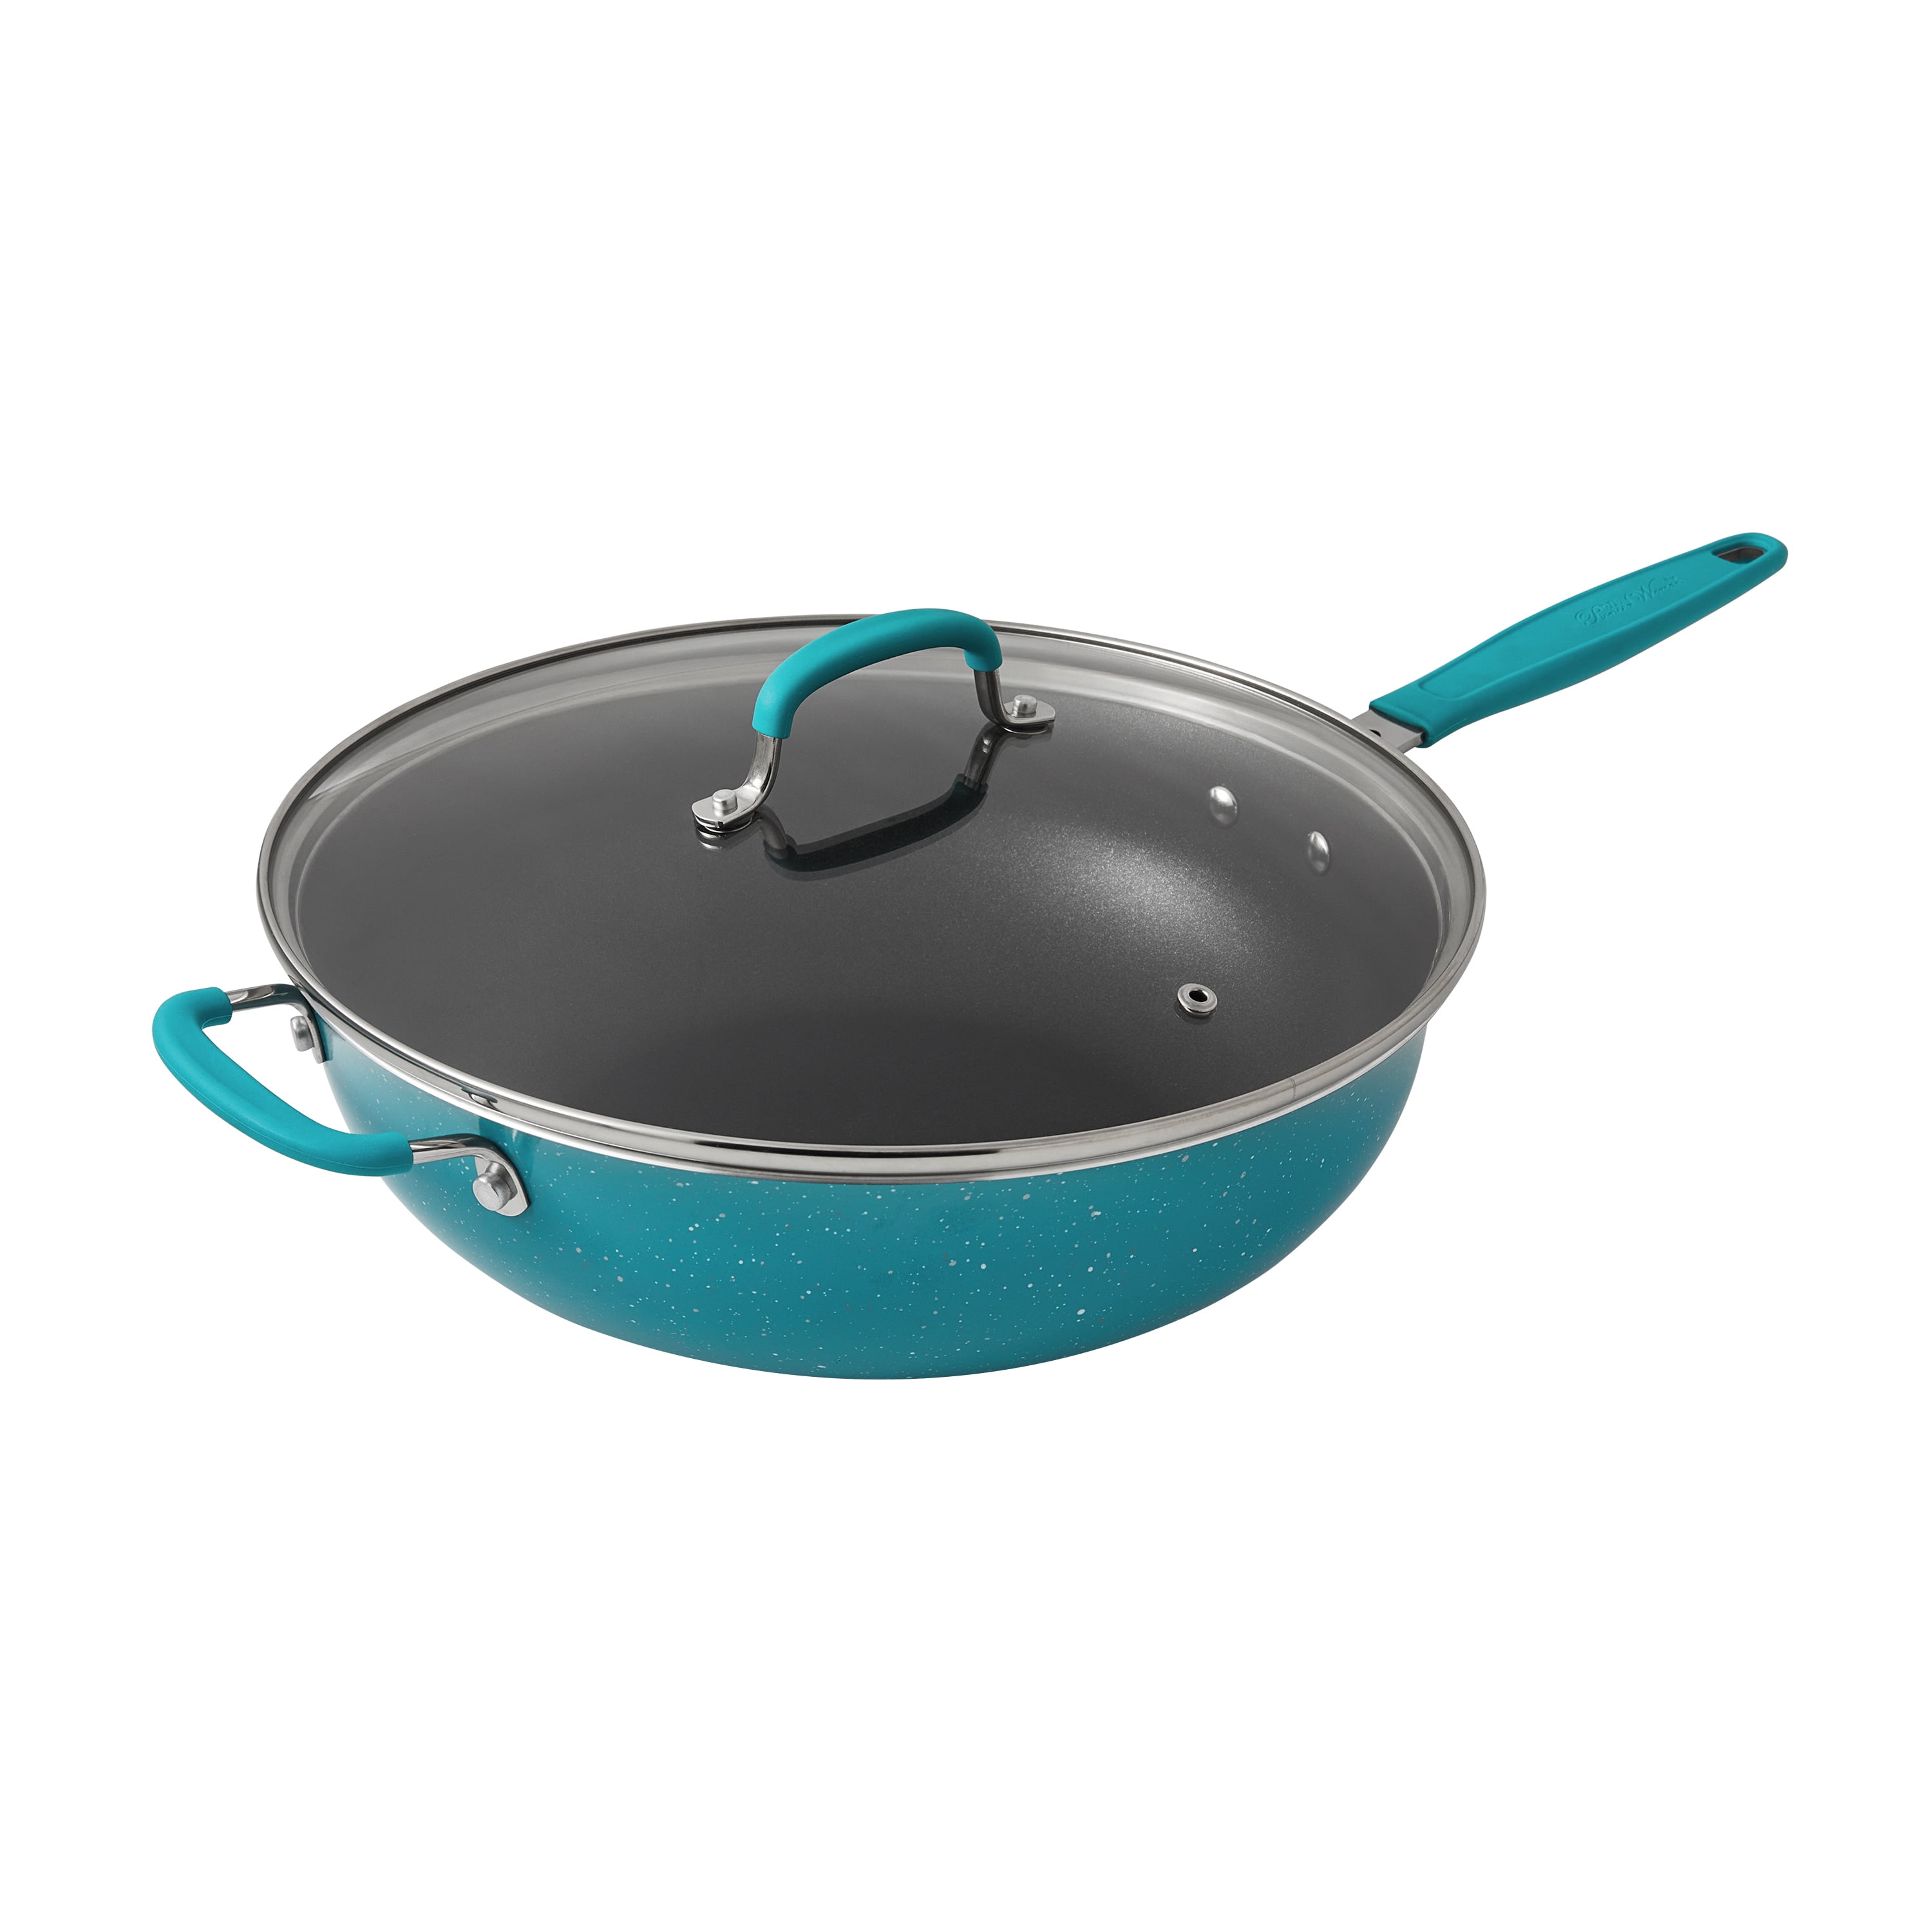 The Pioneer Woman 13 Inch Everyday Pan Blue